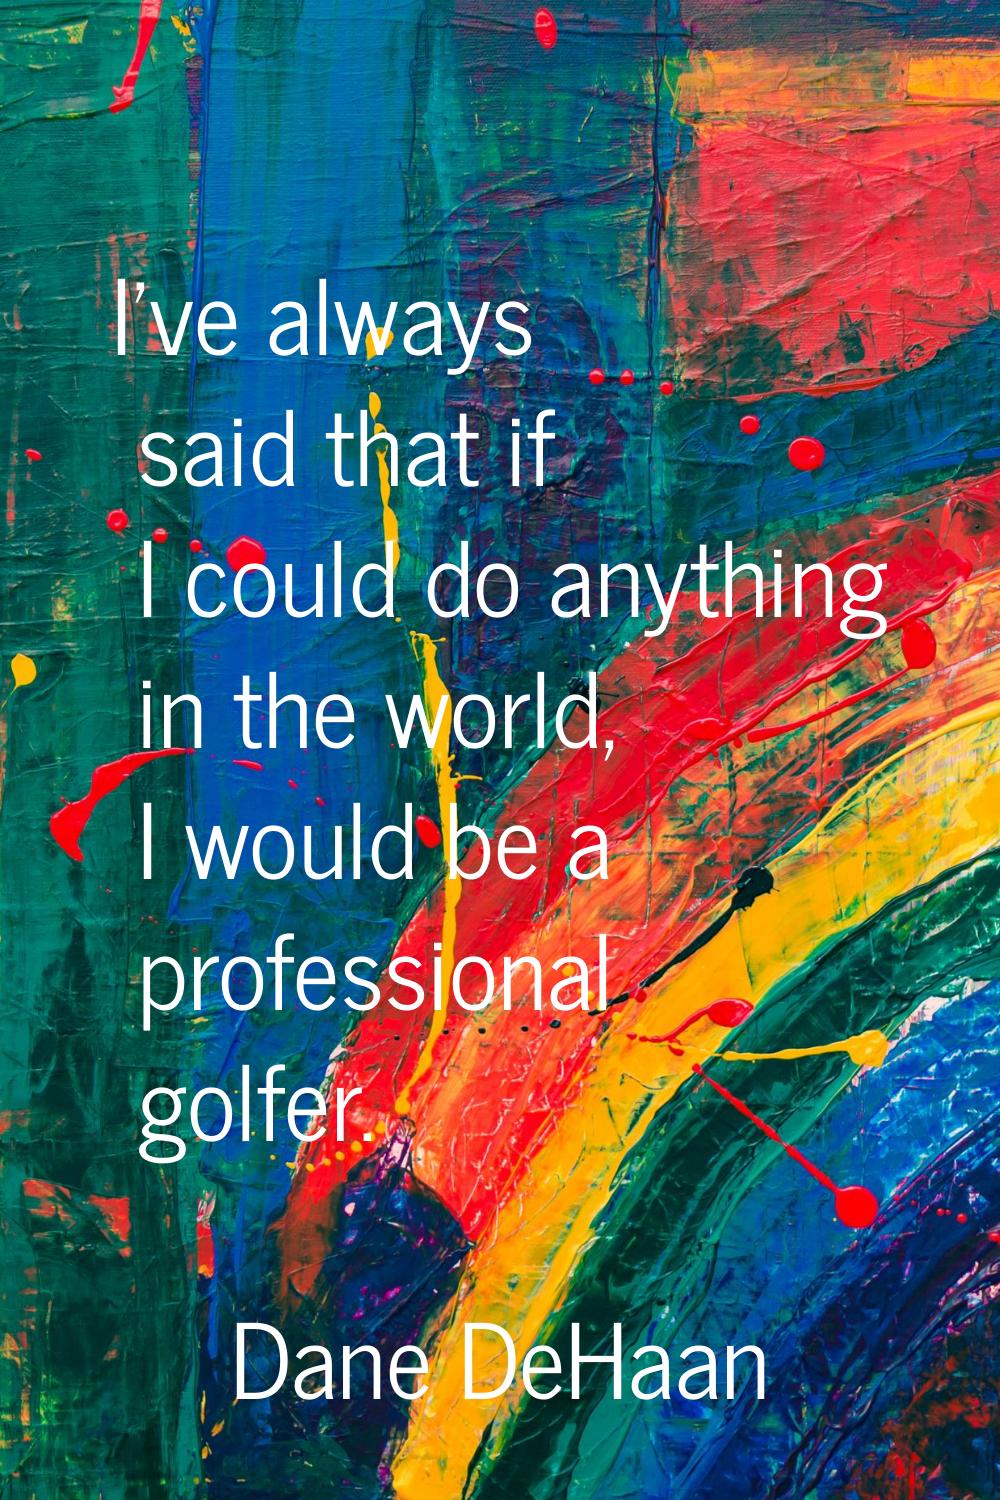 I've always said that if I could do anything in the world, I would be a professional golfer.